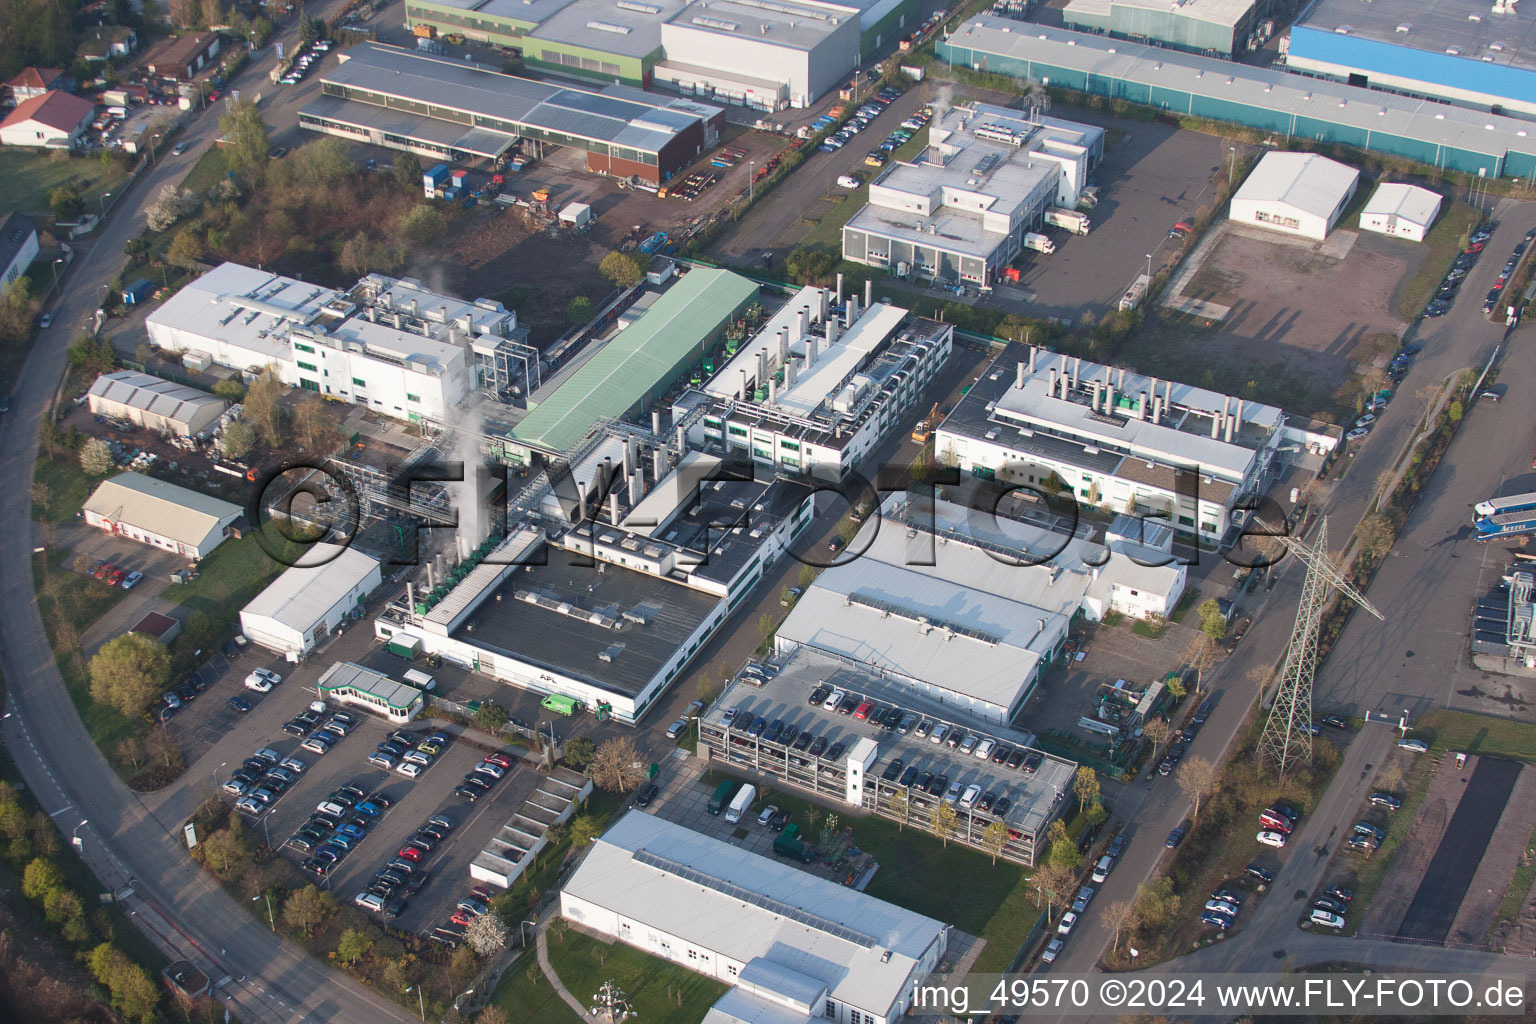 Drone image of Industrial area in Offenbach an der Queich in the state Rhineland-Palatinate, Germany